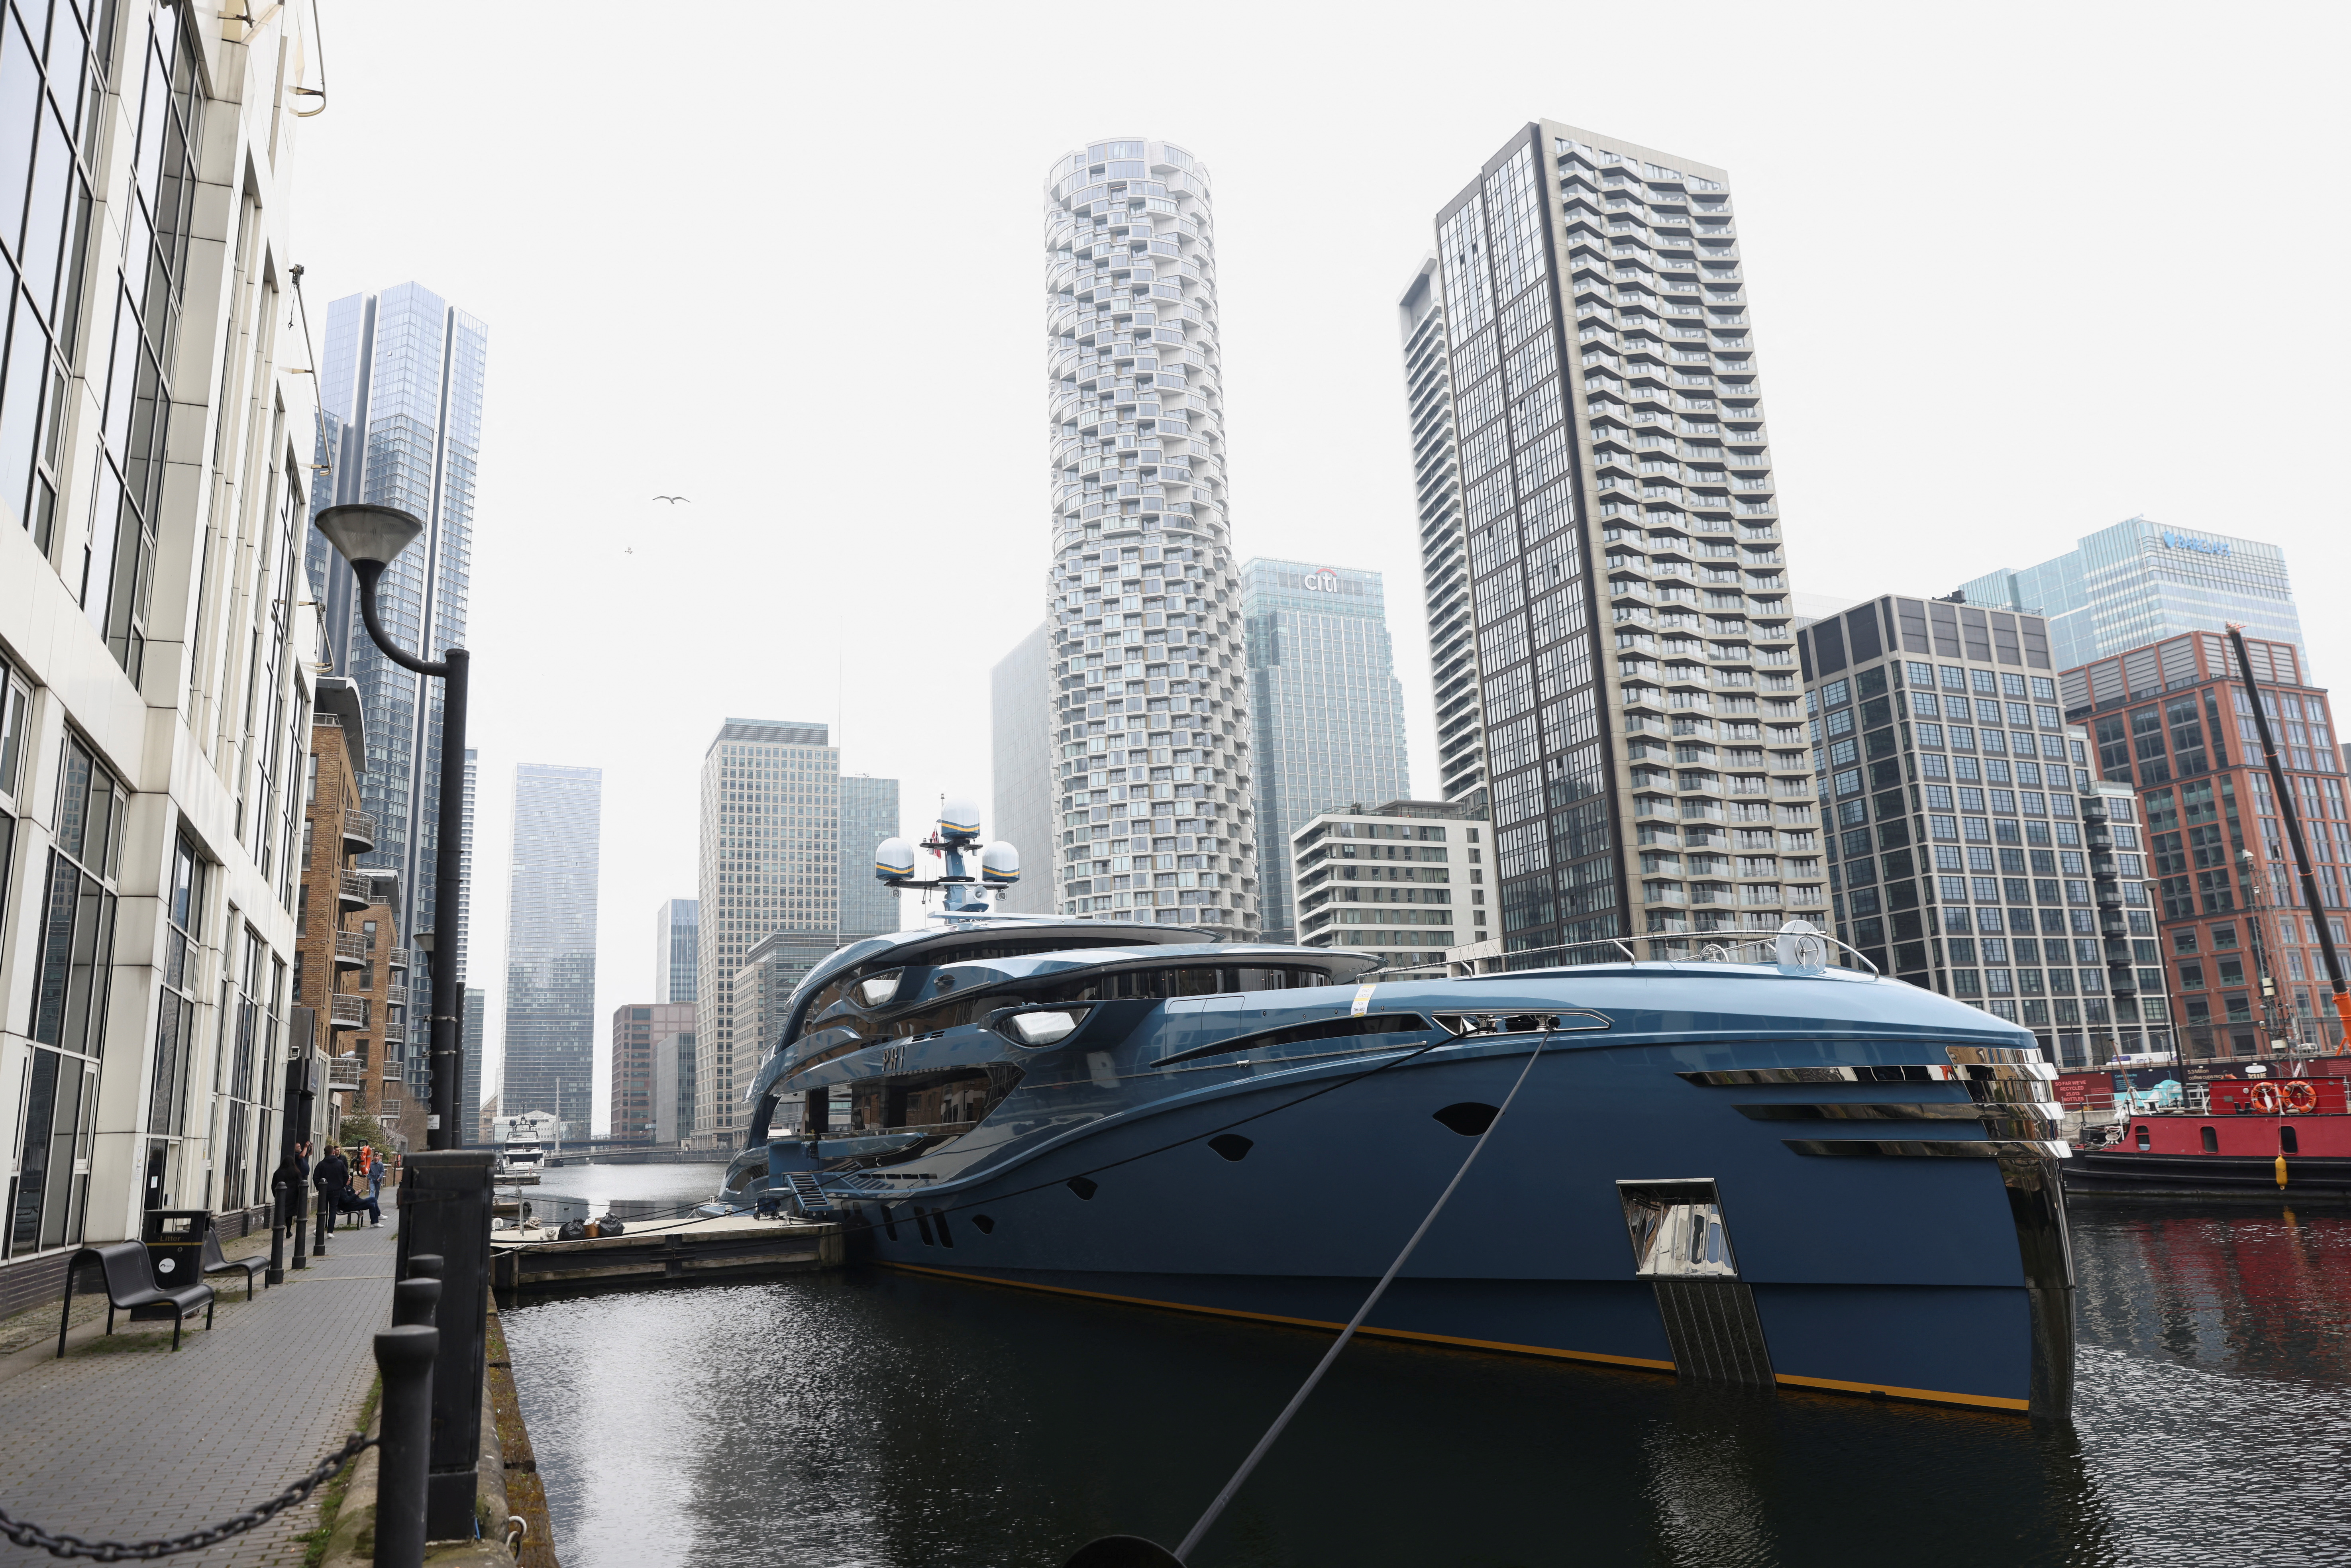 Detained Russian-owned superyacht Phi is seen in West India and Millwall Docks in London